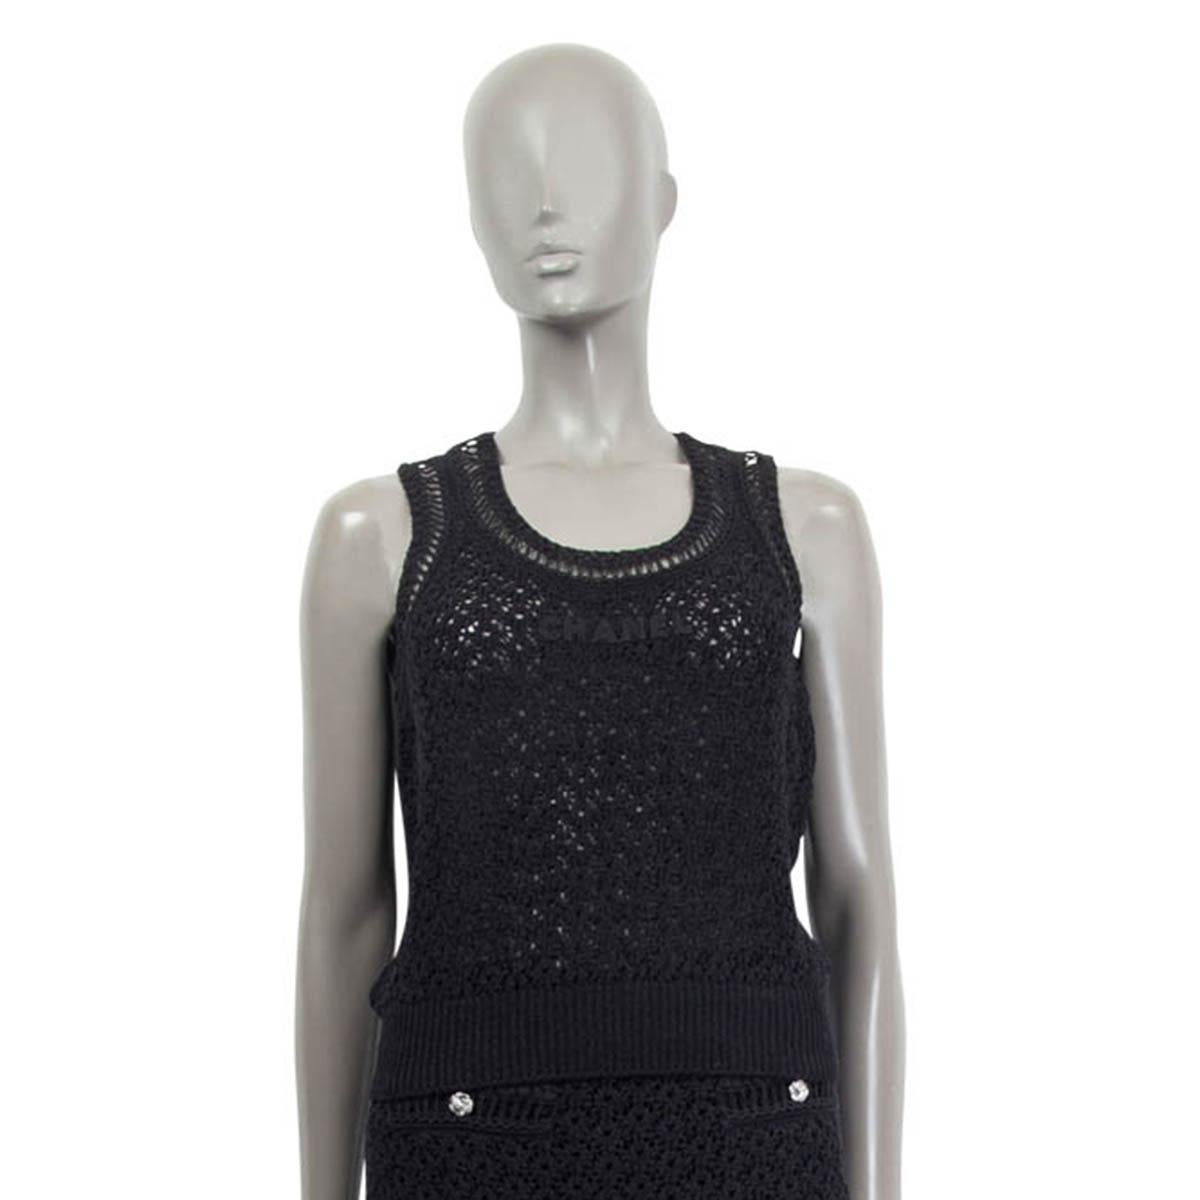 100% authentic Chanel sleeveless top in black cotton (65%) and polyamide (35%). Pre spring/summer 2020 collection. Embellished with an embroidered Chanel logo in black on the front.  Has been worn and is in excellent condition. Matching cardigan and